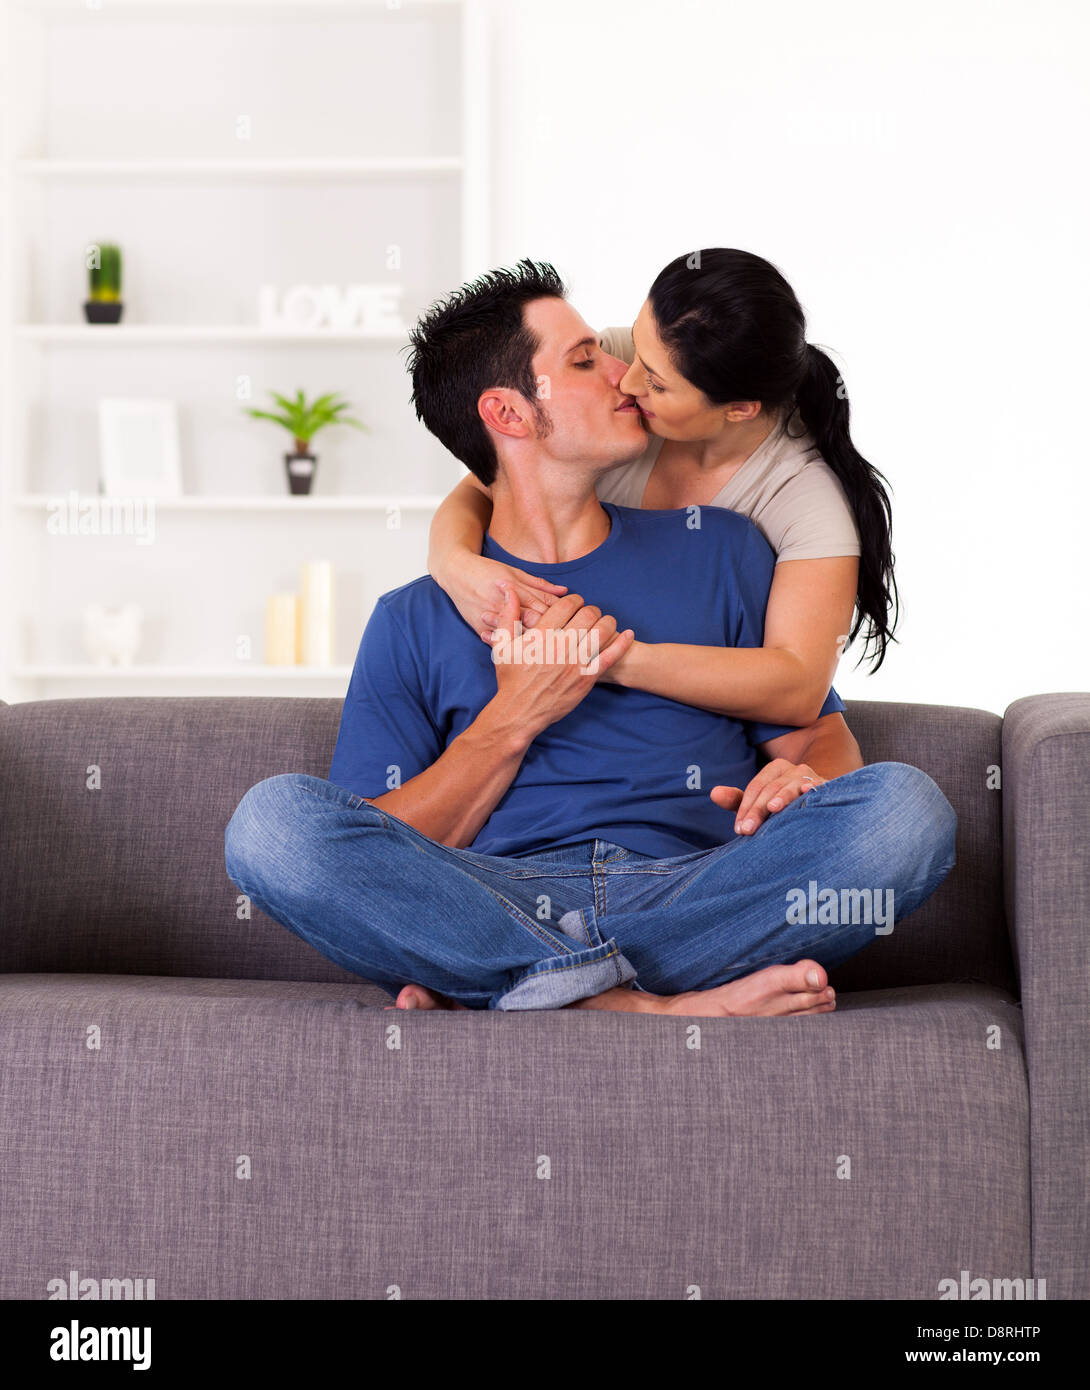 young couple kissing on sofa at home Stock Photo - Alamy